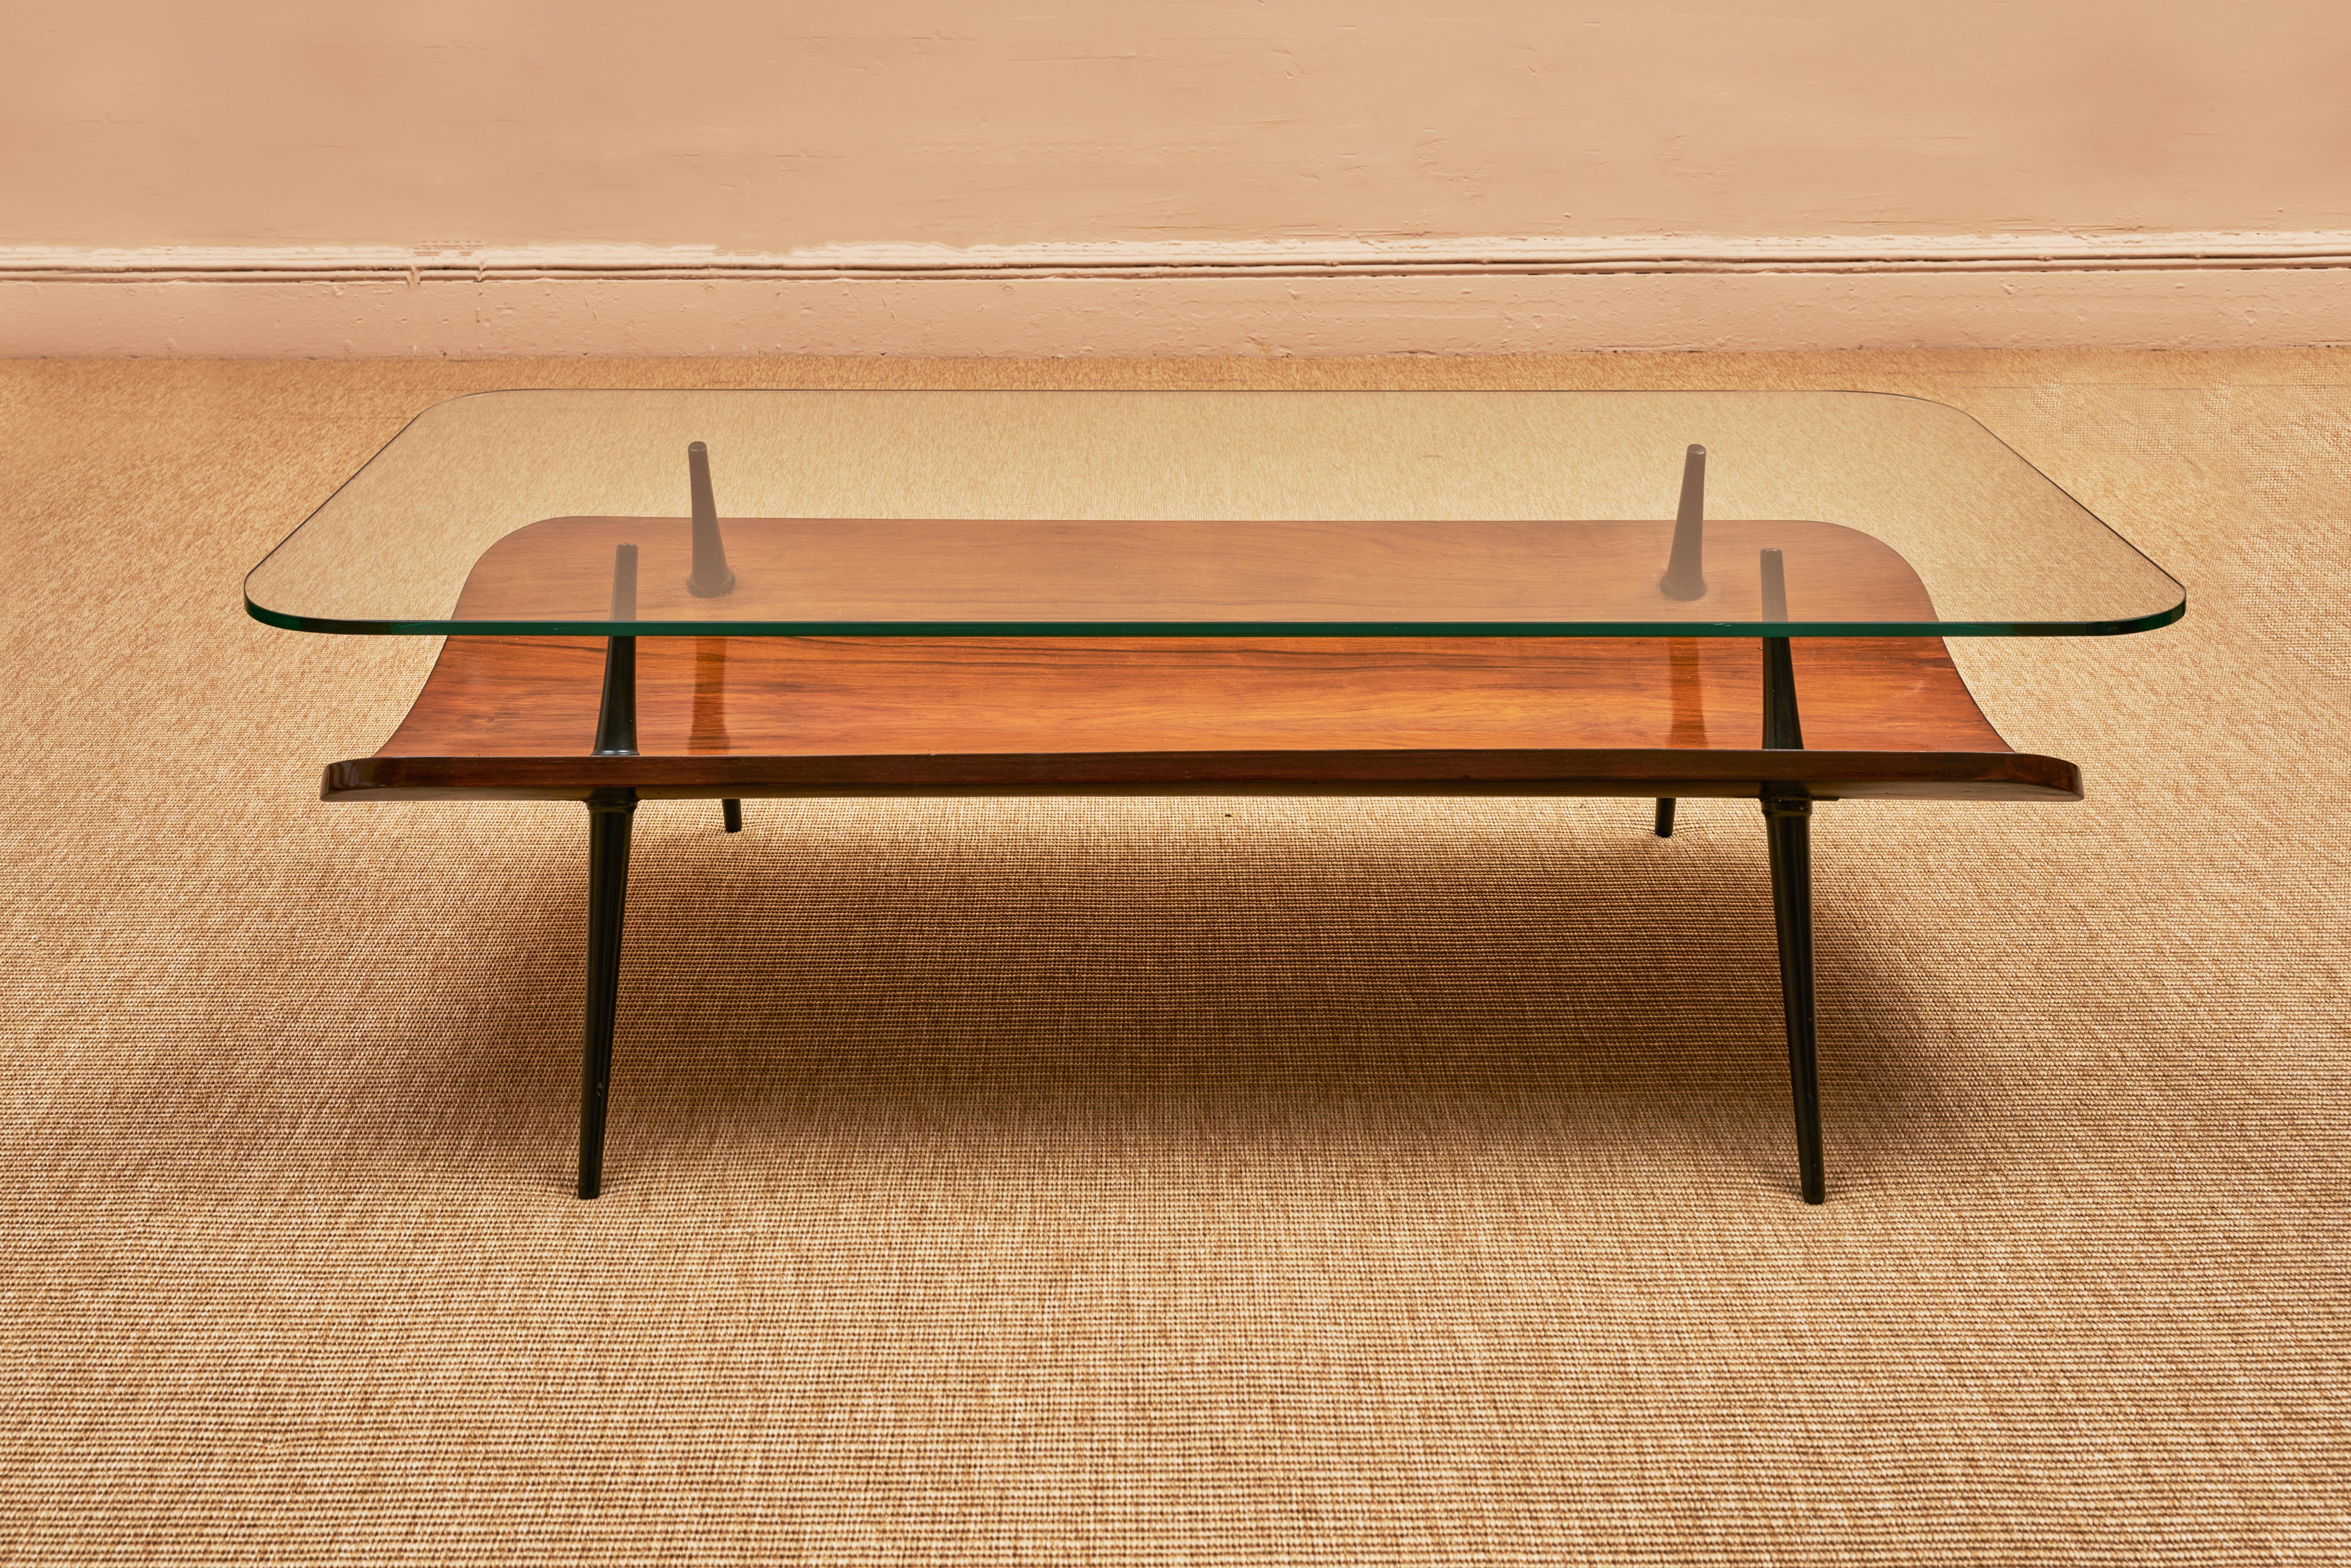 A Brazilan glass, walnut, and caviúna wood coffee table, circa 1950. This stunning piece features a rectangular glass top with a beautiful walnut and caviúna wood base. The reddish-brown hue of the caviúna wood complements the warm tones of the